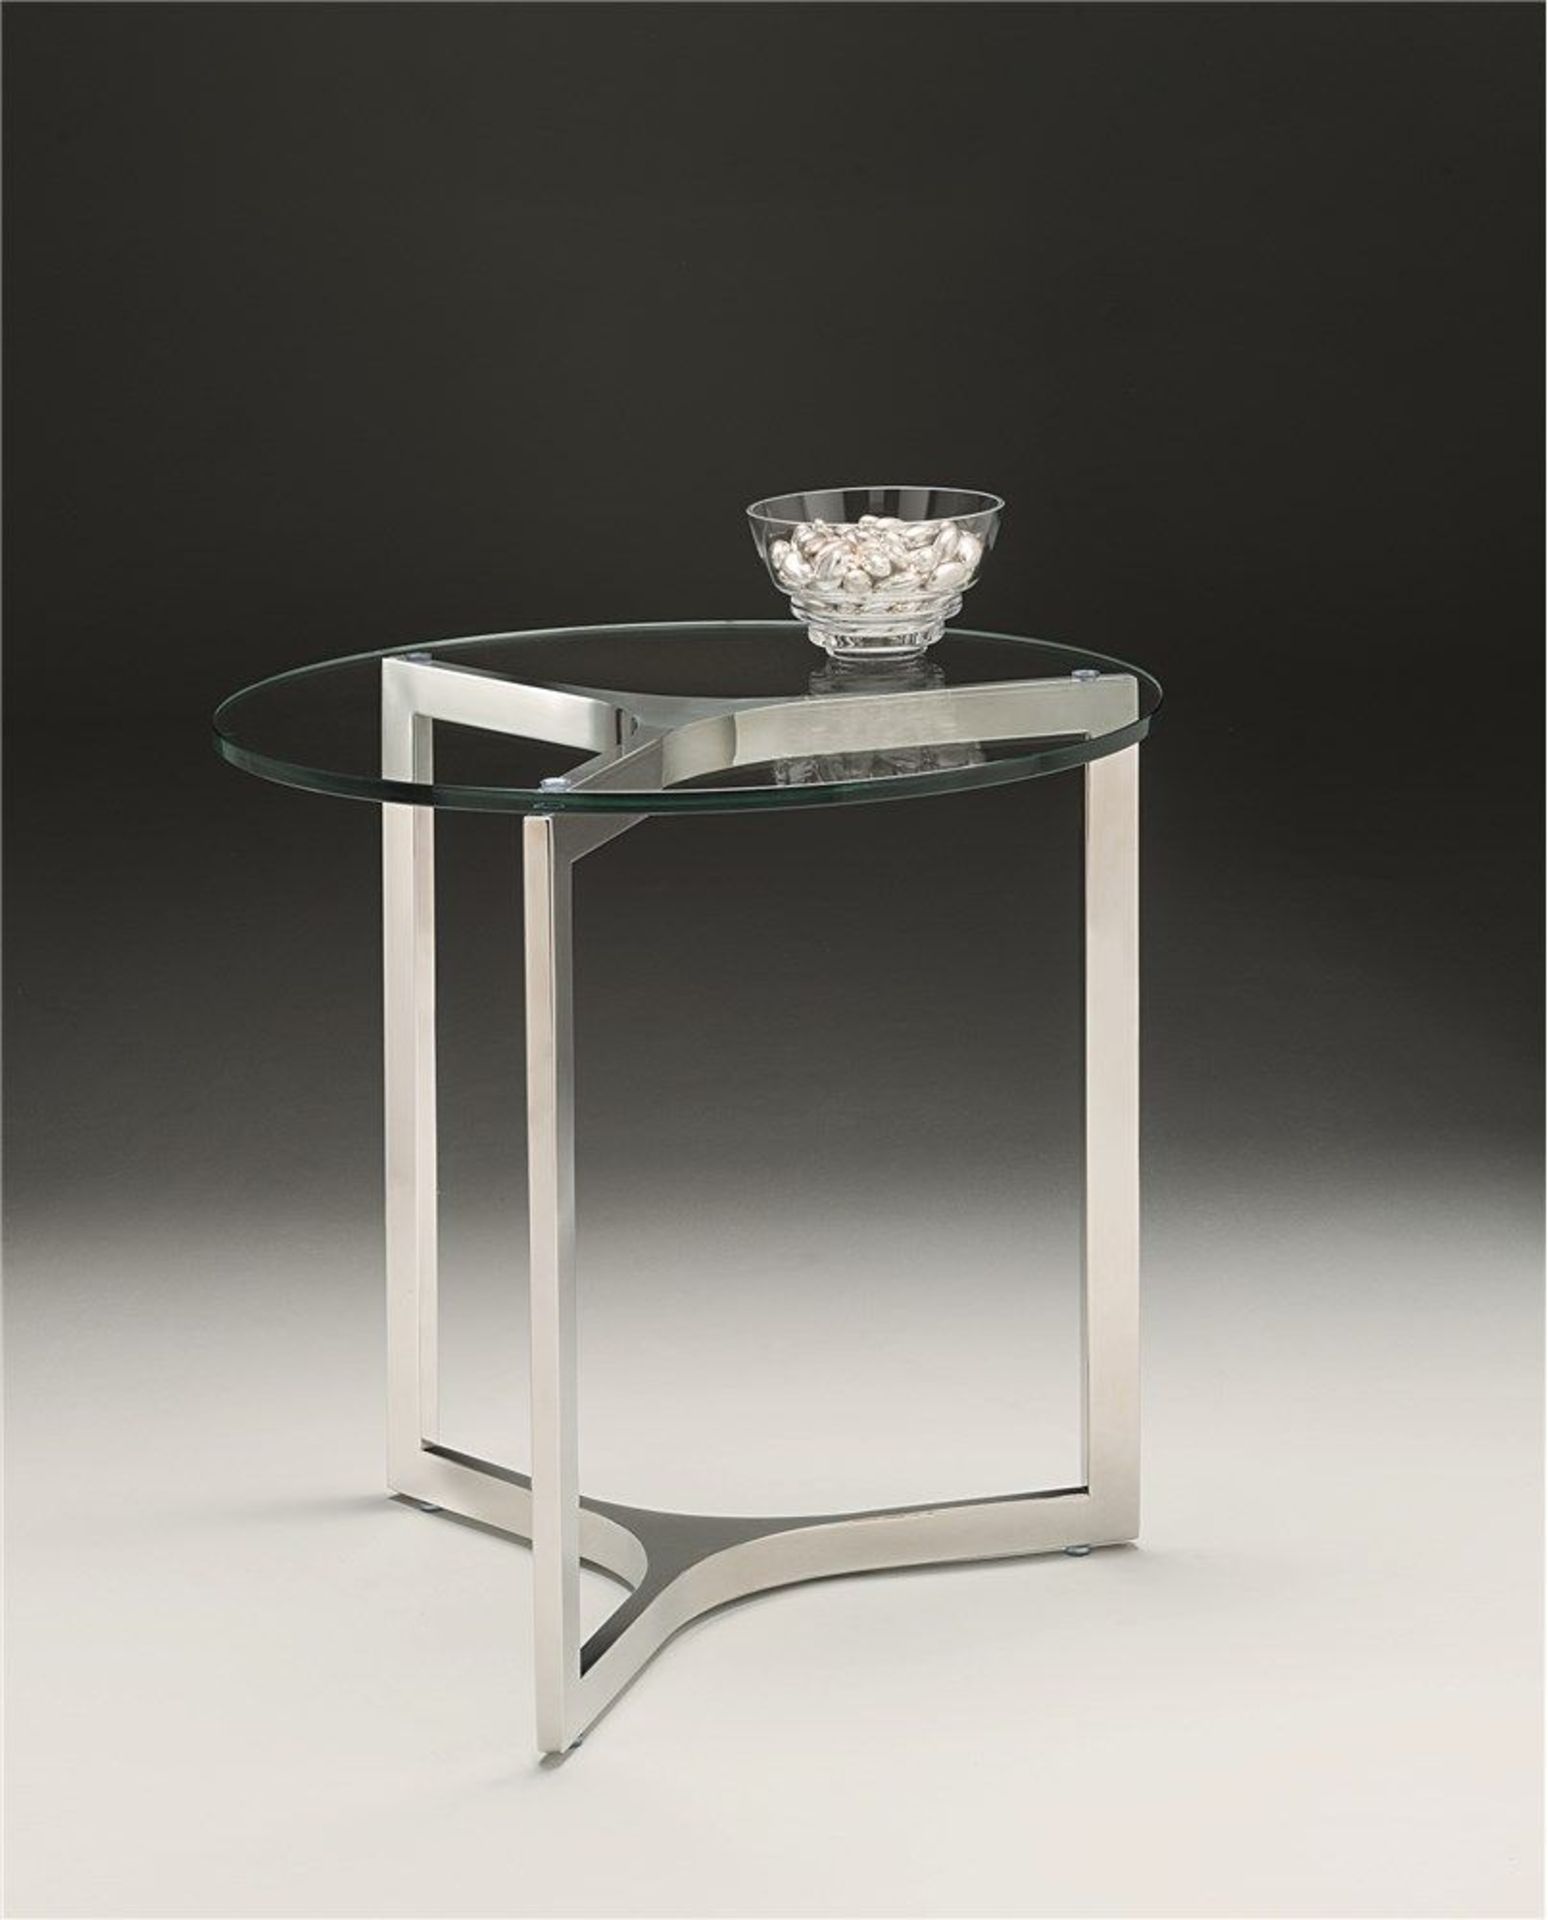 1 x Designer Chelsom REVOLVE Lamp Table - CL081 - Laser Cut Polished Stainless Steel Base With Clear